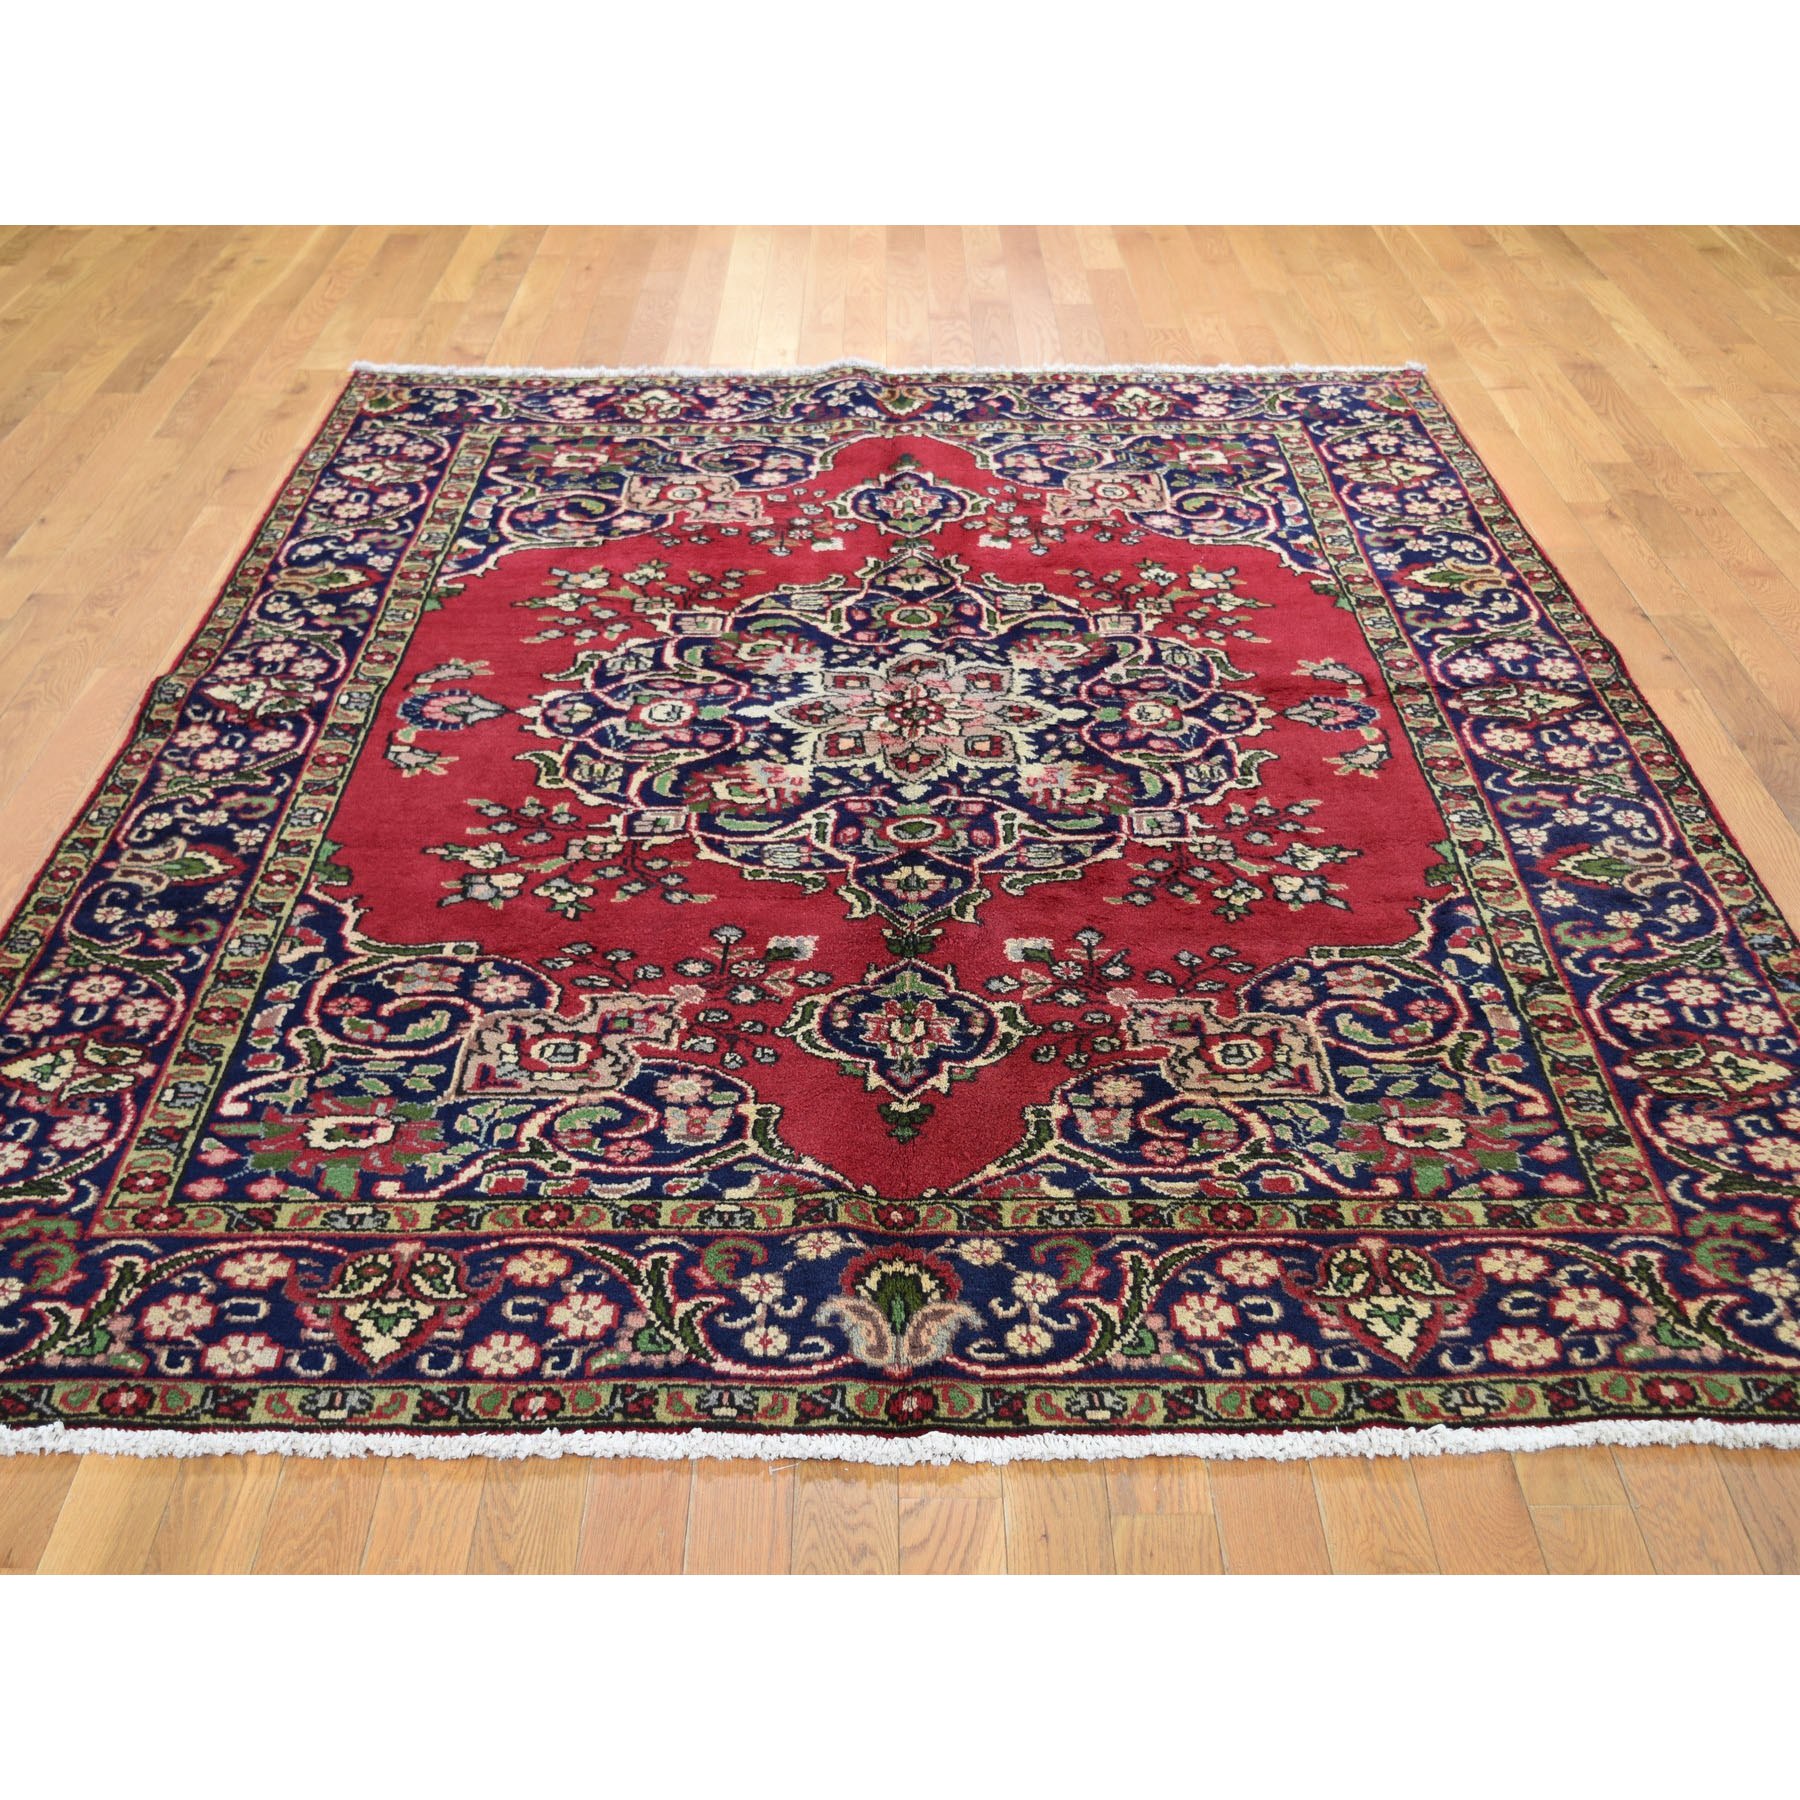 6-6 x9- Red Semi Antique Persian Tabriz Pure Wool Exc Condition Hand Knotted Oriental Rug 